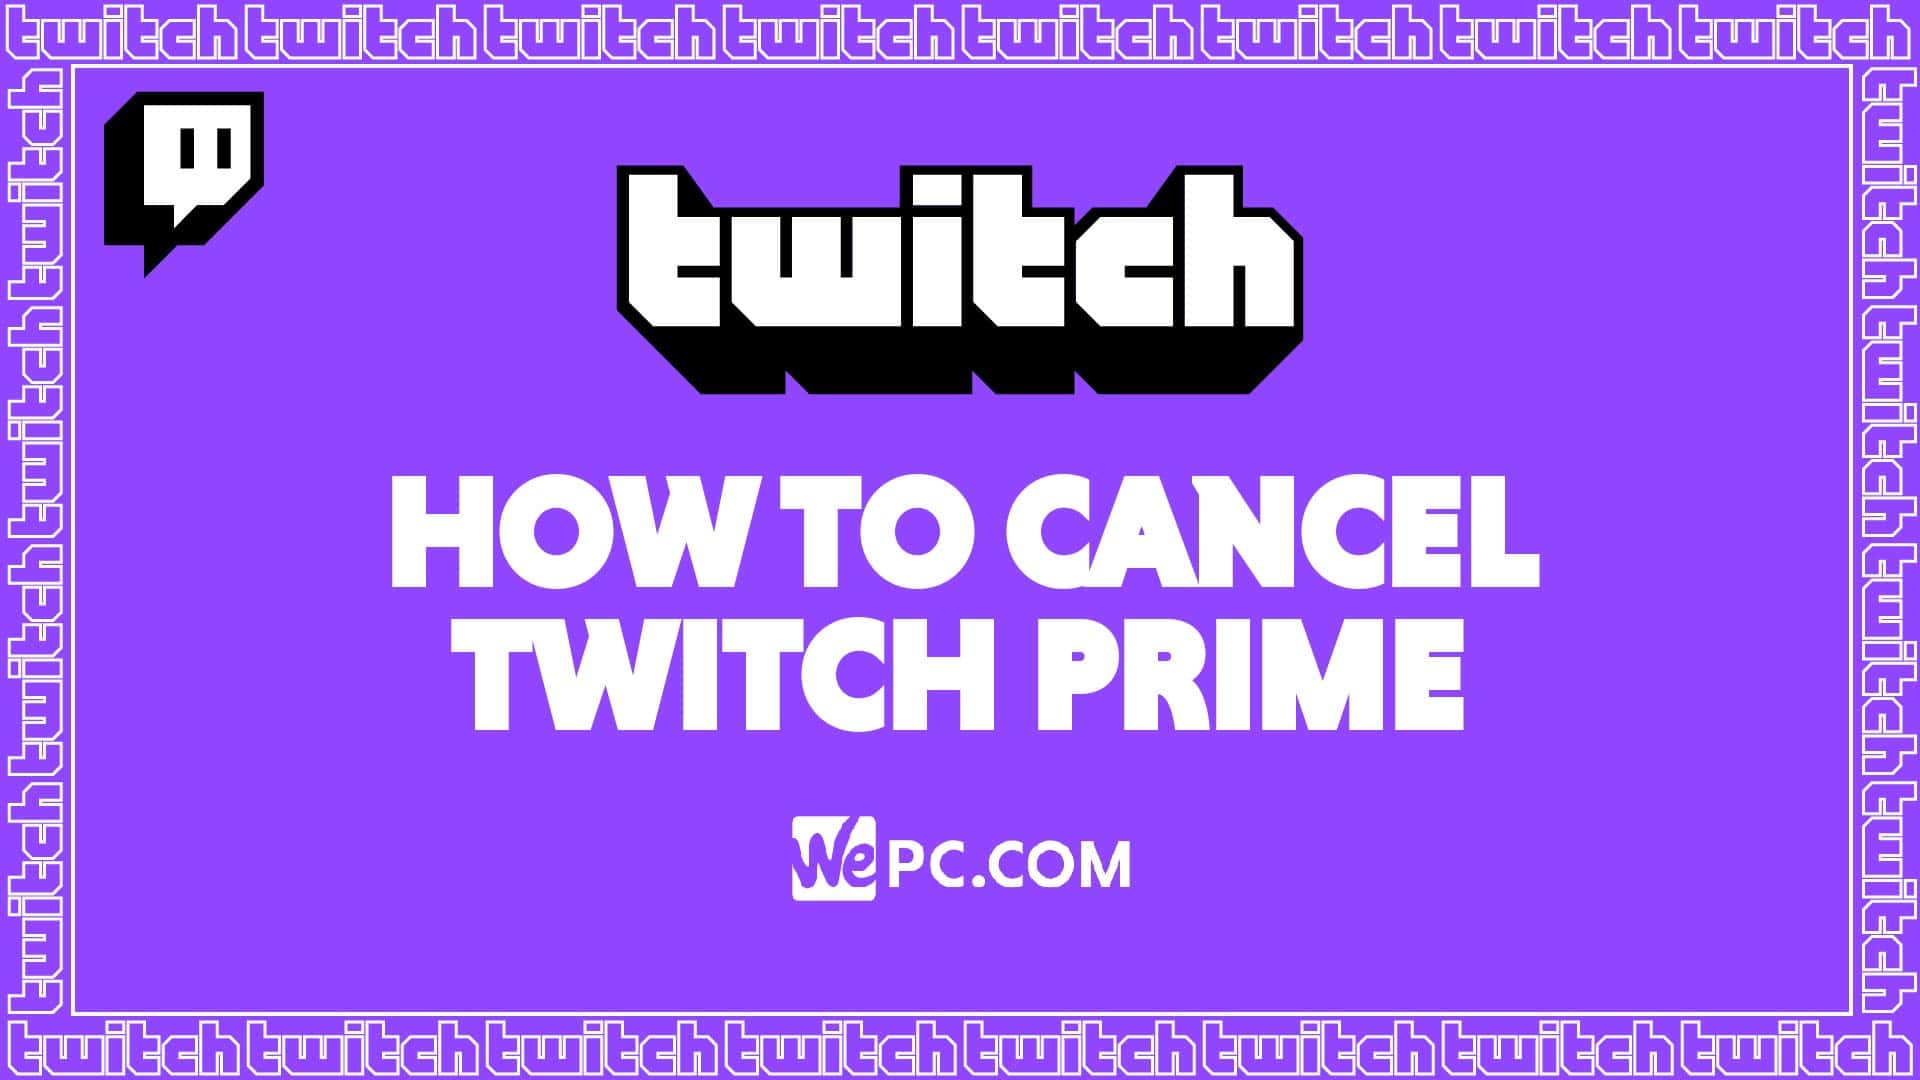 How To Cancel A Twitch Prime Membership Wepc